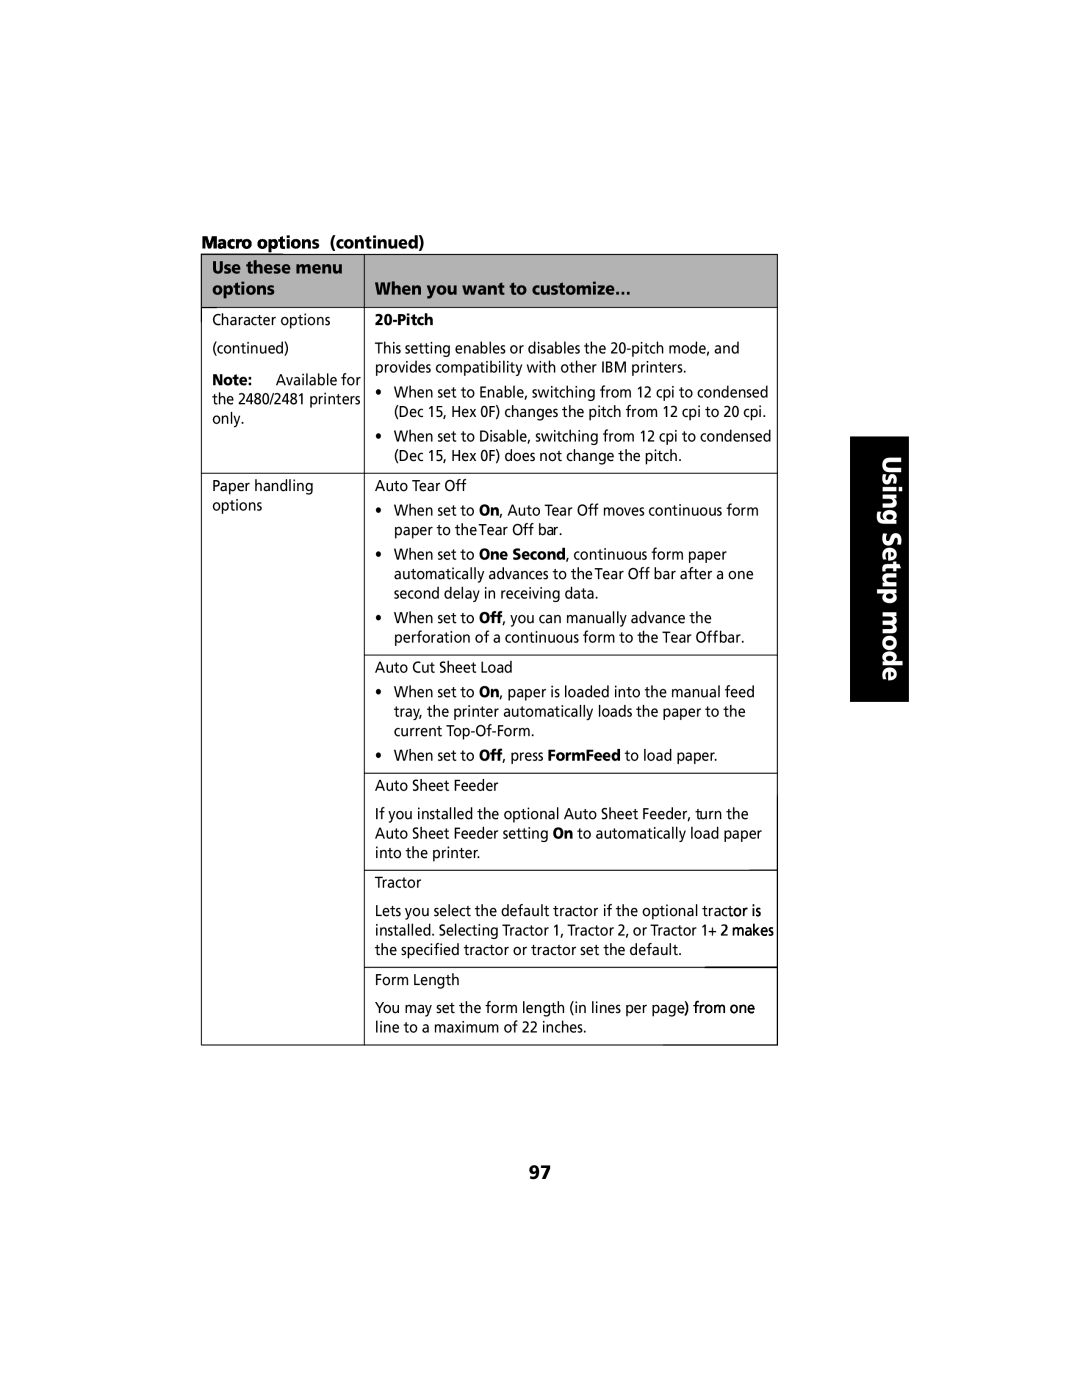 Lexmark manual Using Setup mode, Pitch, This setting enables or disables the 20-pitch mode, and, the 2480/2481 printers 